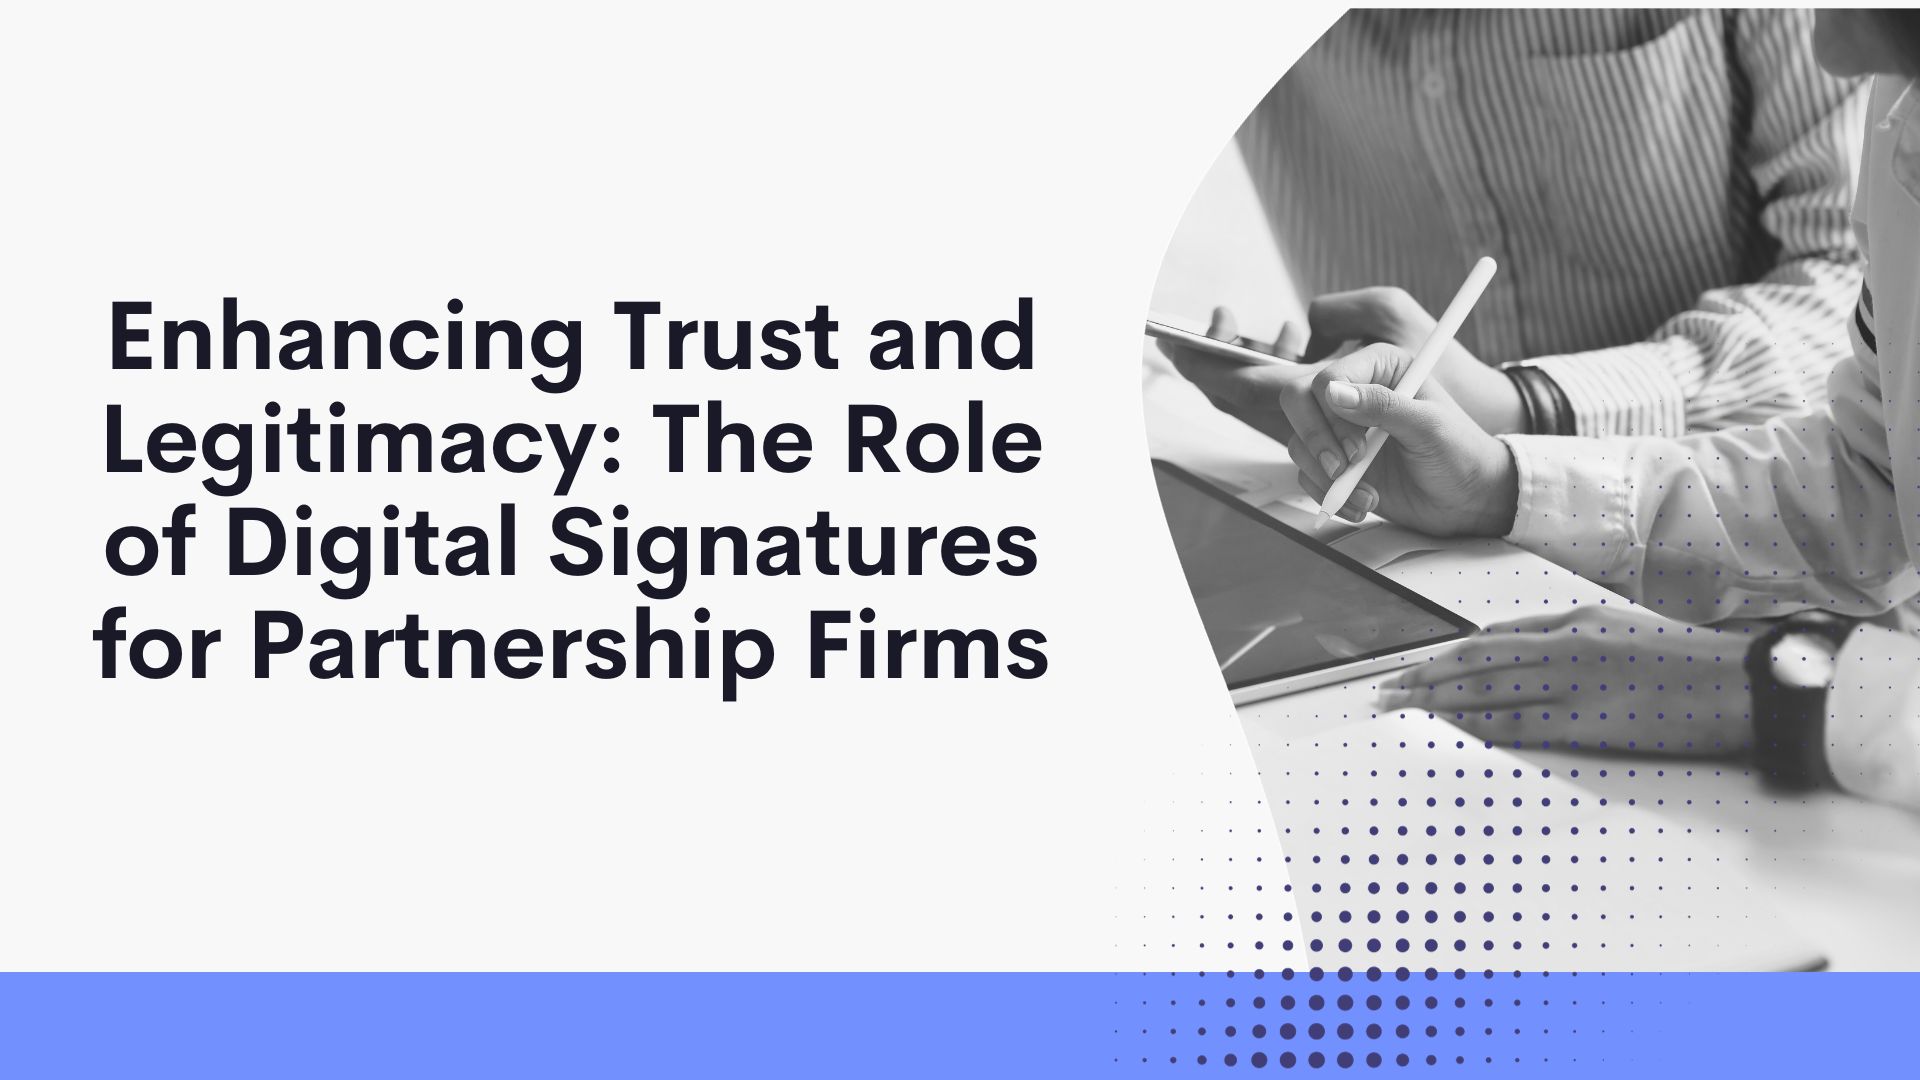 Enhancing Trust and Legitimacy: The Role of Digital Signatures for Partnership Firms